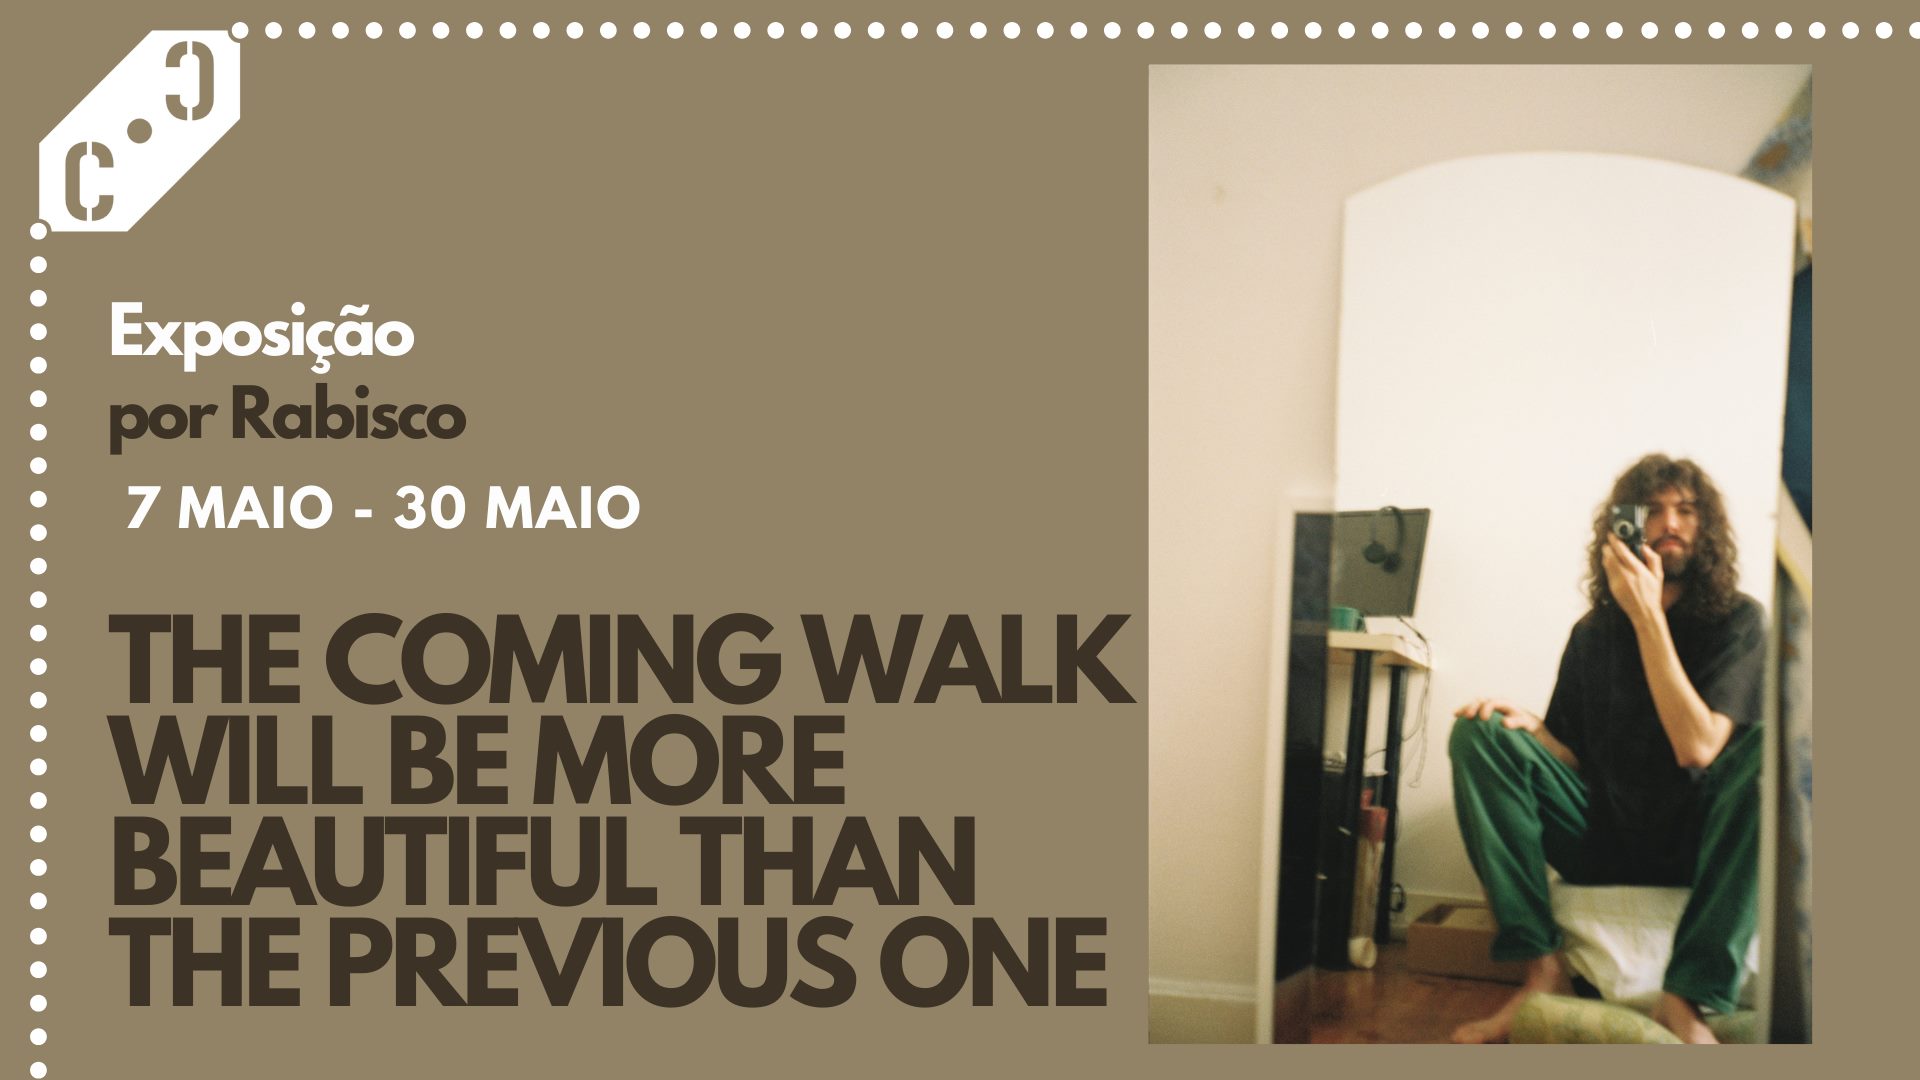 Exposição: THE COMING WALK WILL BE MORE BEAUTIFUL THAN THE PREVIOUS ONE